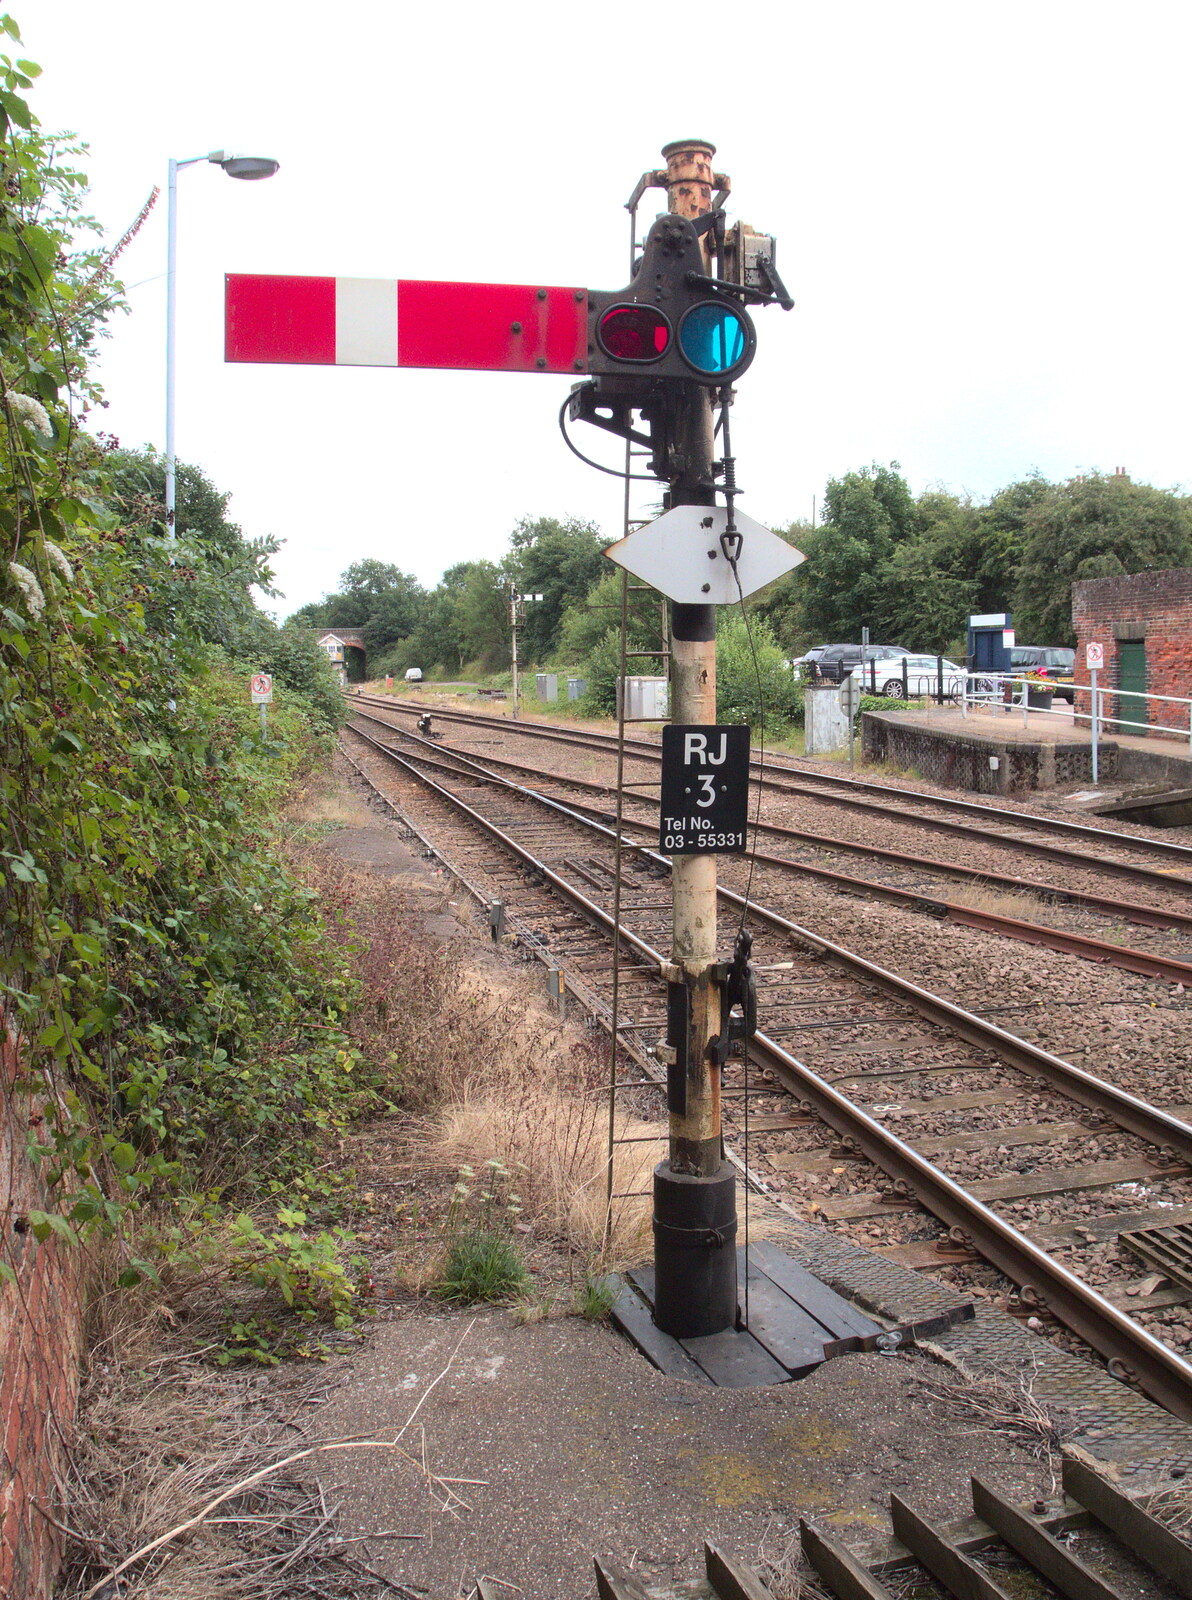 An ancient semaphore signal in stop position from The Humpty Dumpty Beer Festival, Reedham, Norfolk - 22nd July 2017